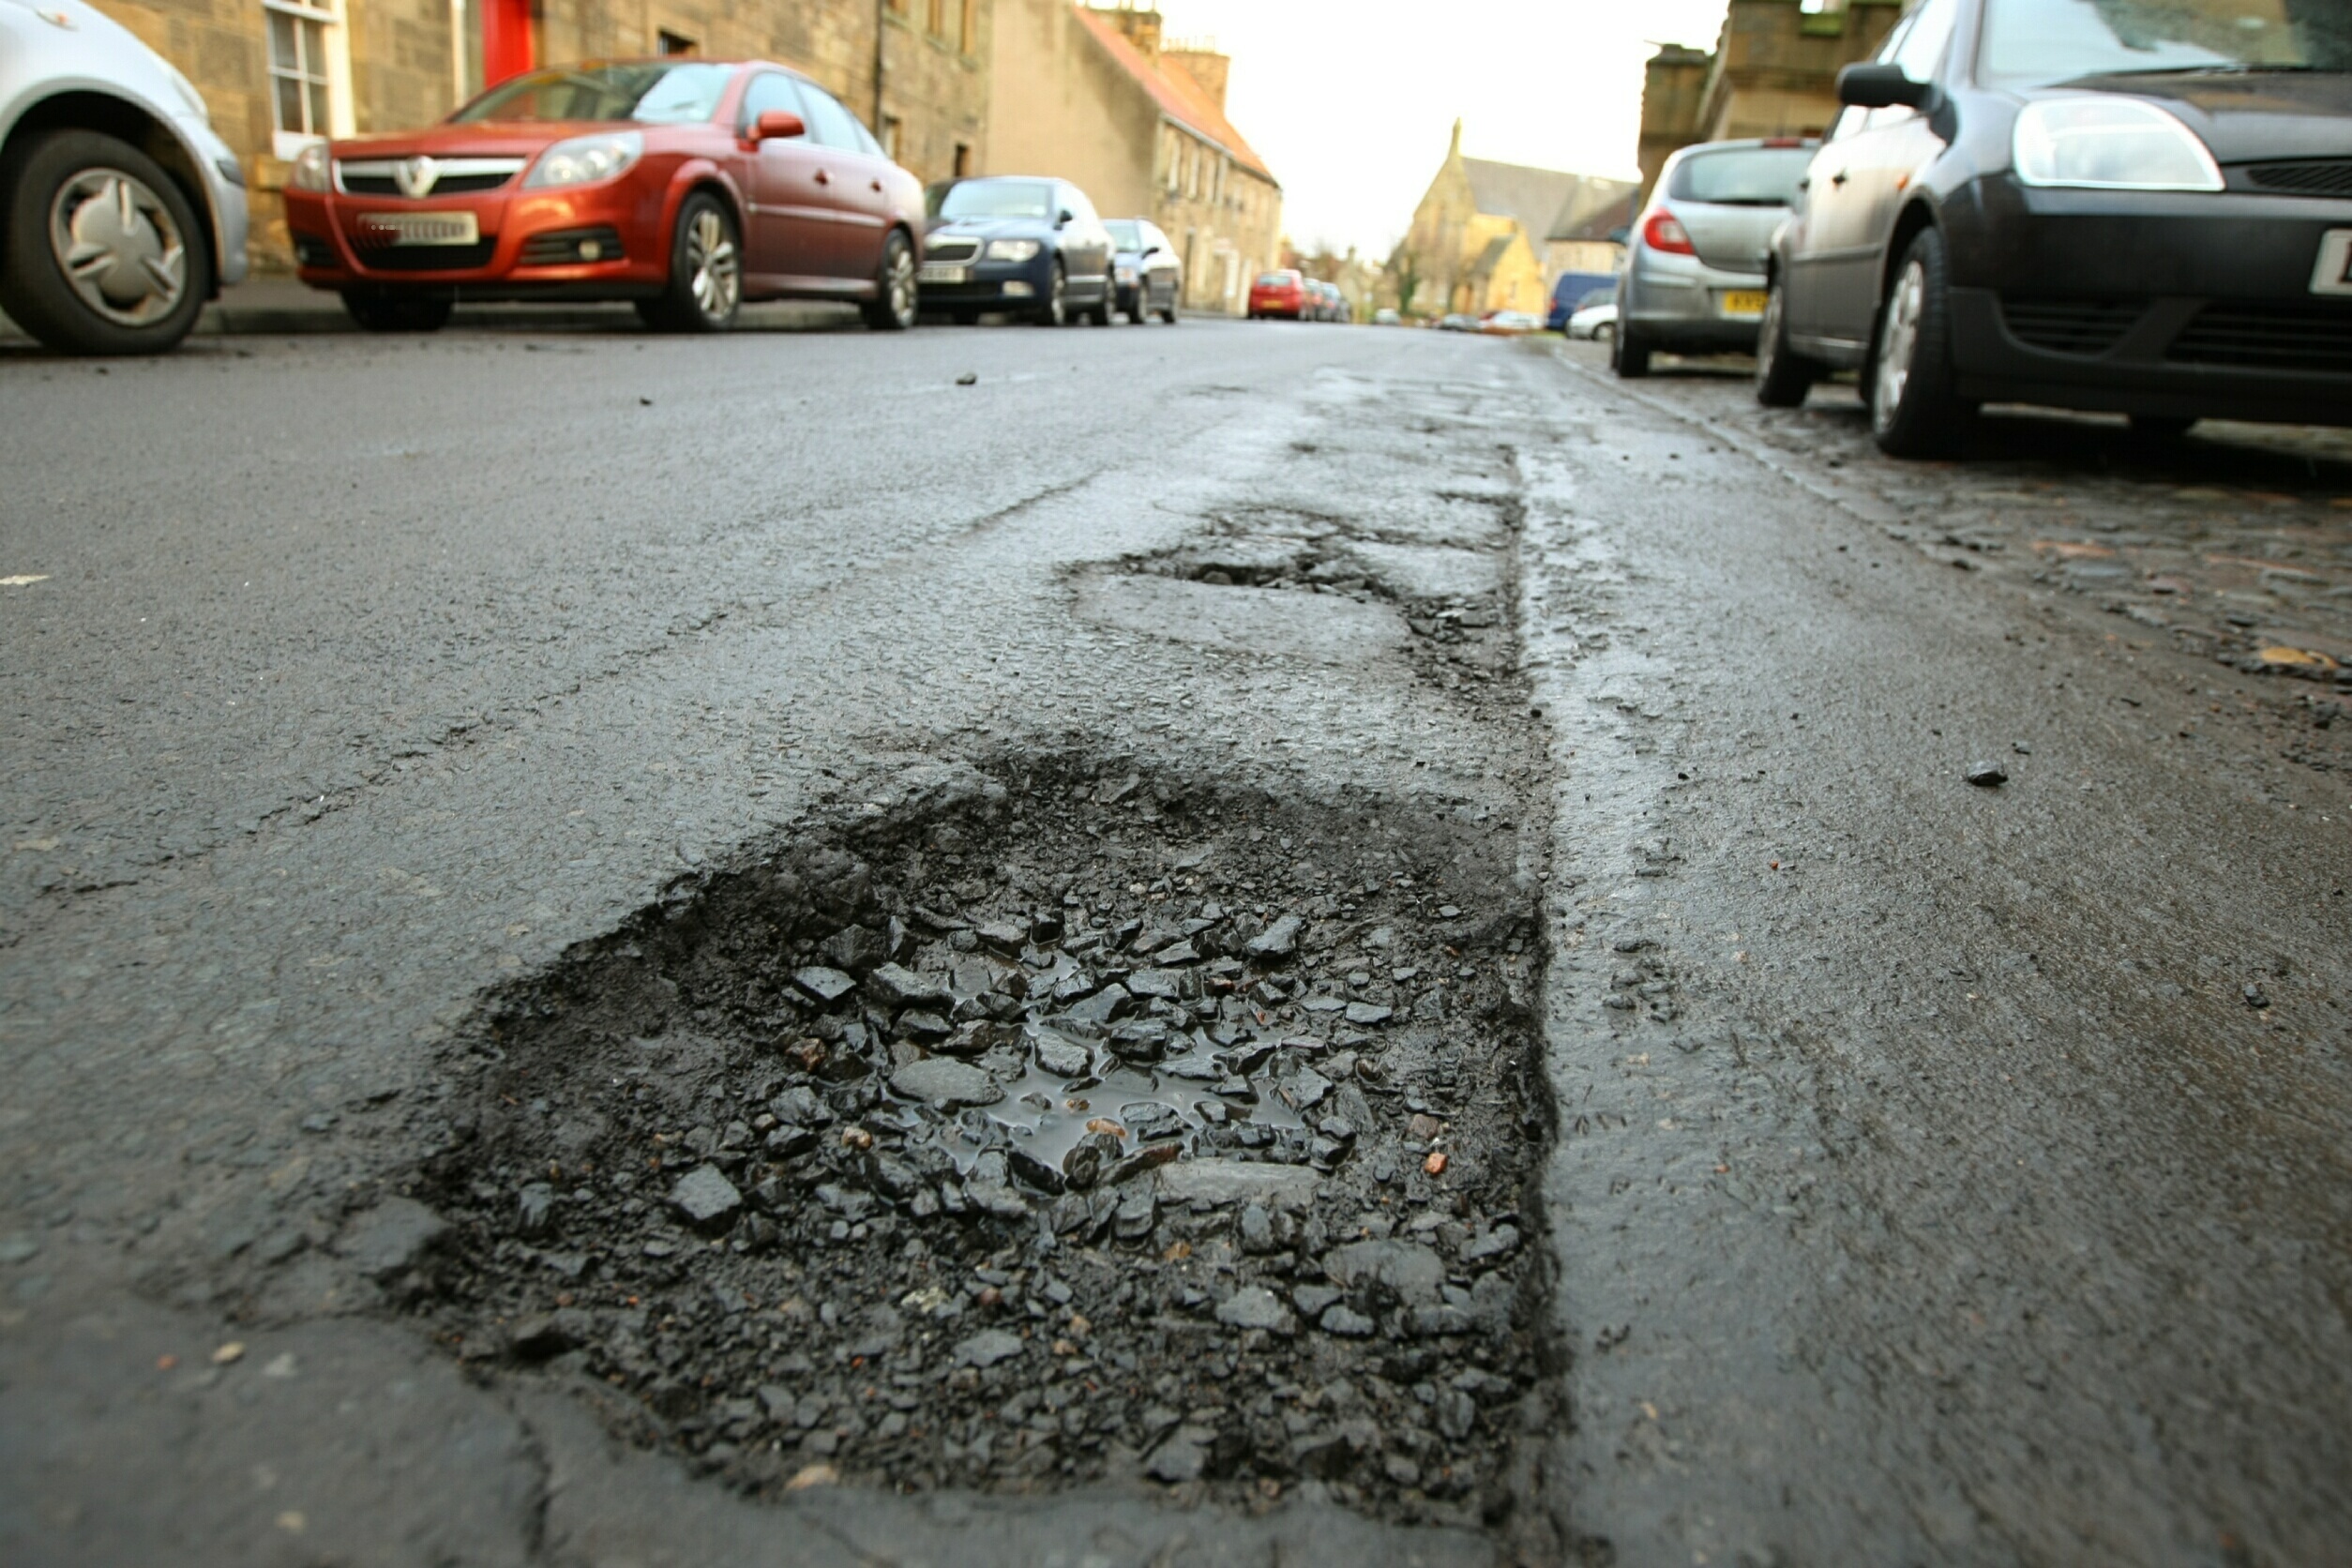 The public's perception is generally that potholes are getting worse - and this one in Cupar was a monster.